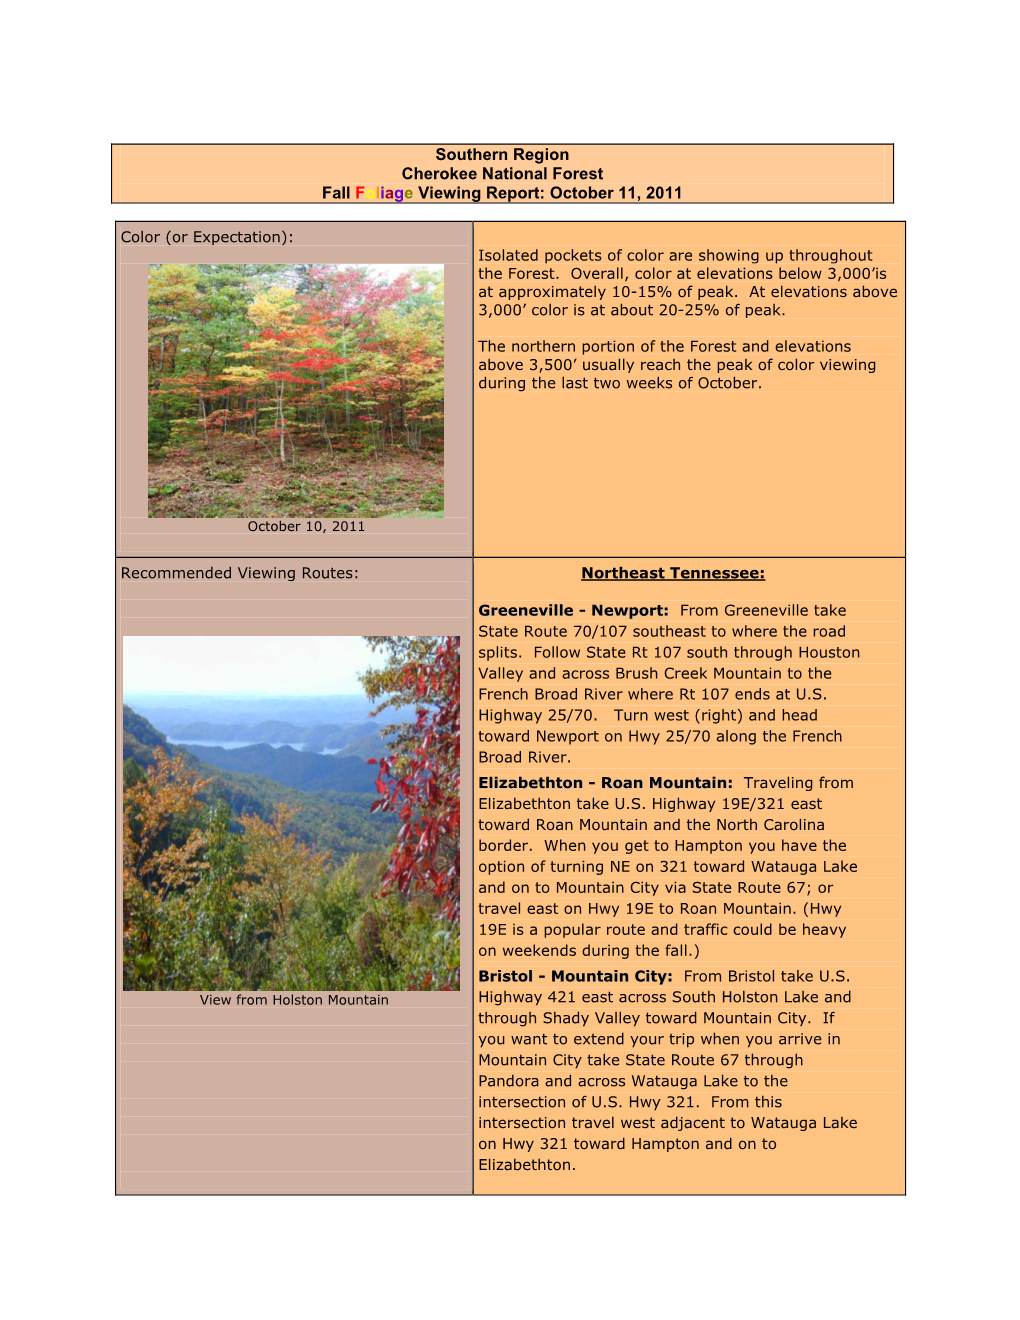 Southern Region Cherokee National Forest Fall Foliage Viewing Report: October 11, 2011